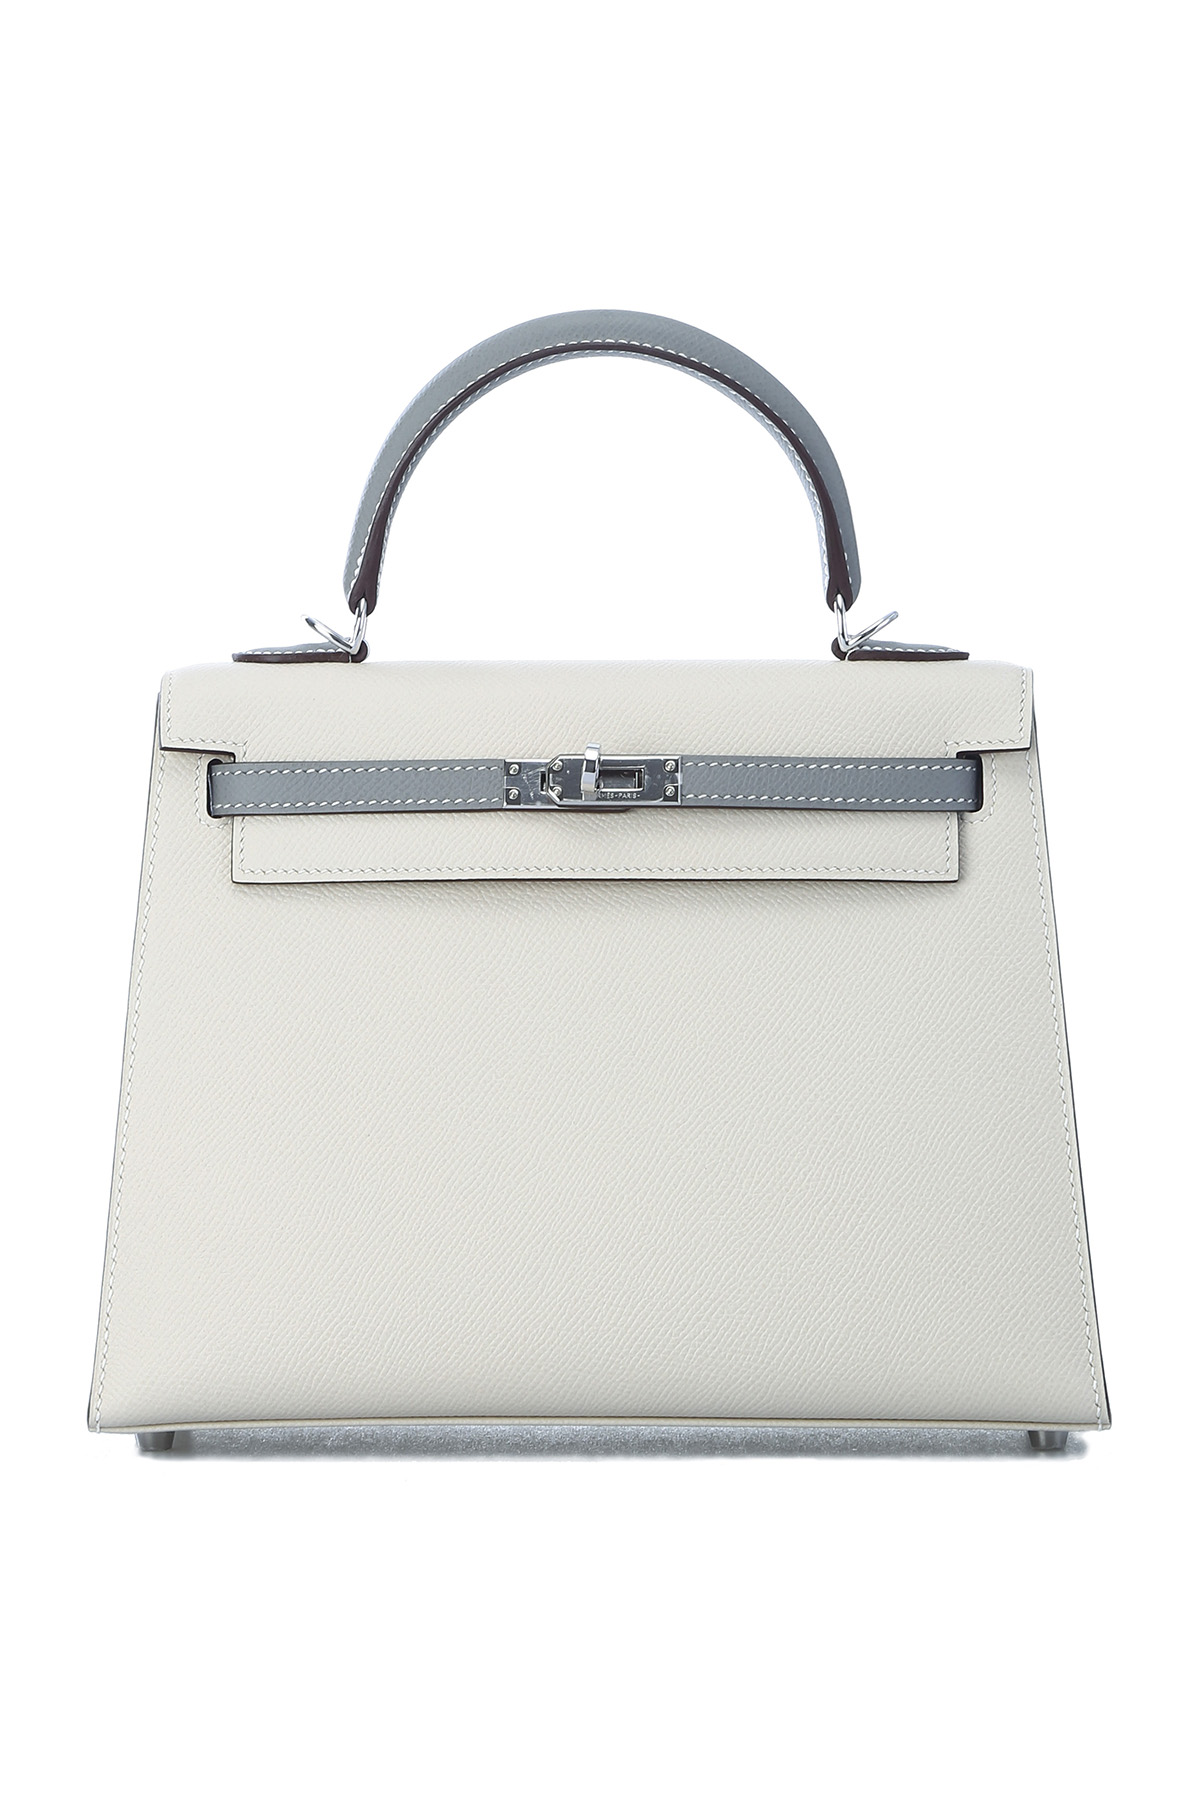 Hermès Kelly 25 Sellier Chalk Craie & Seagull Grey Gris Mouette Epsom with  Palladium Hardware